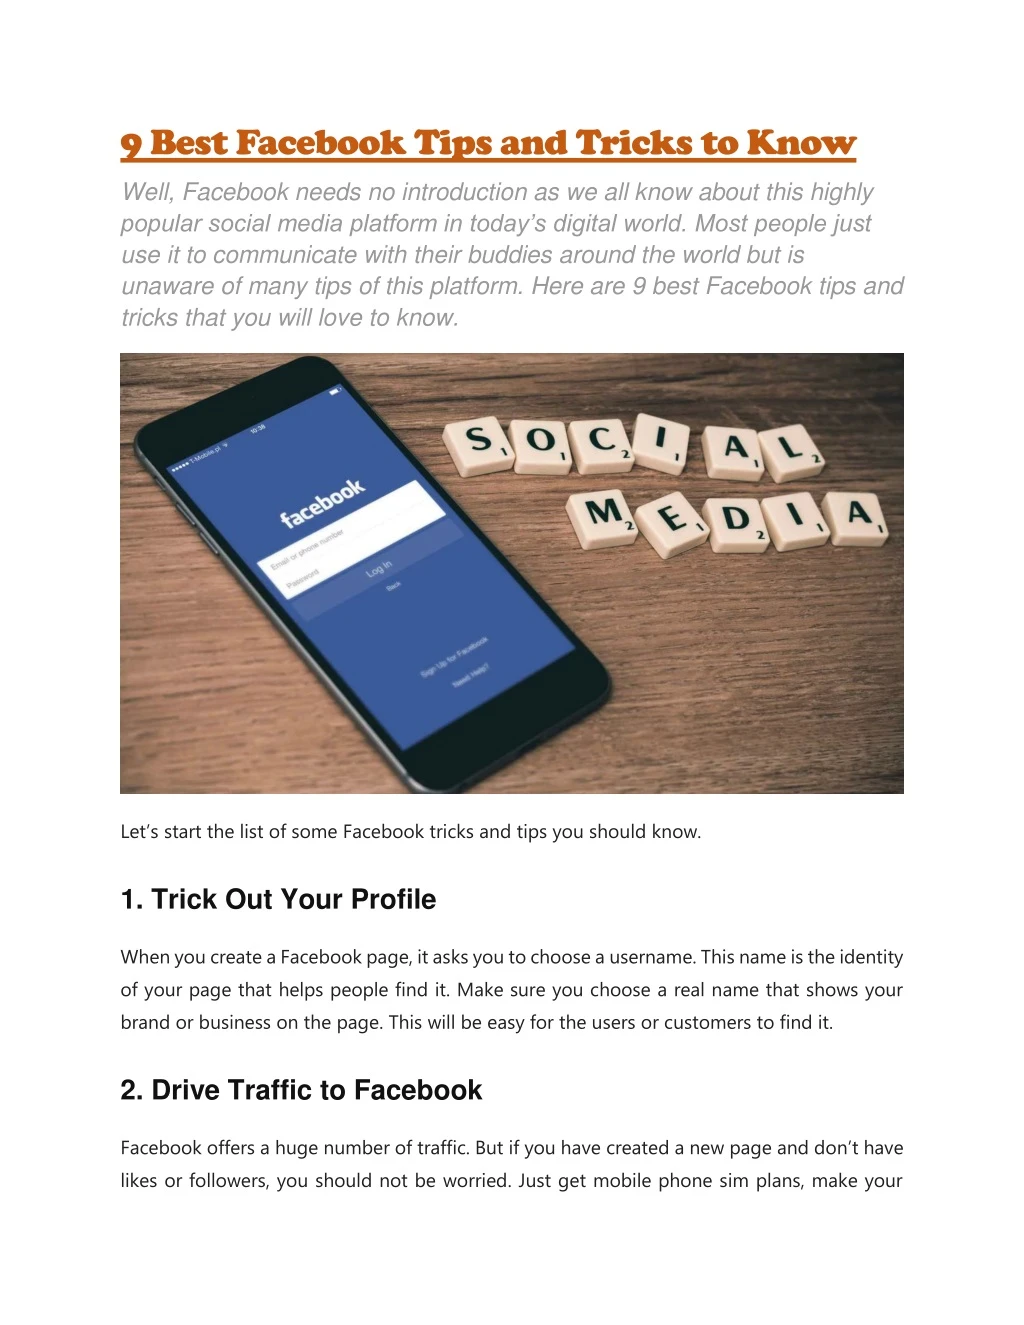 9 best facebook tips and tricks to know